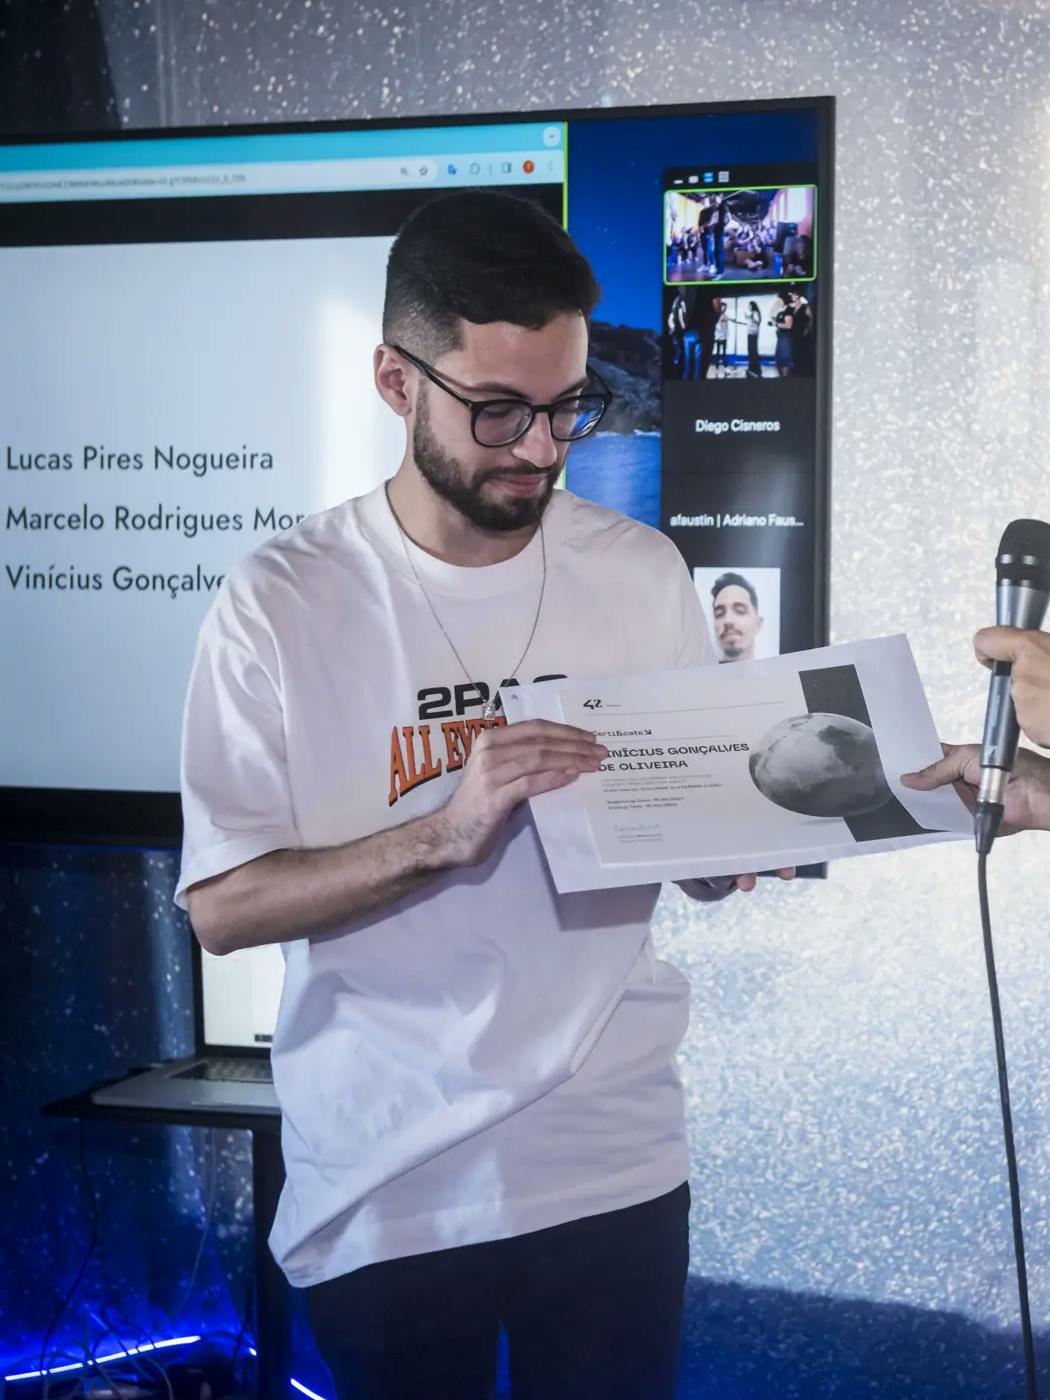 A photo of me receiving my Human Coder certificate at 42 São Paulo